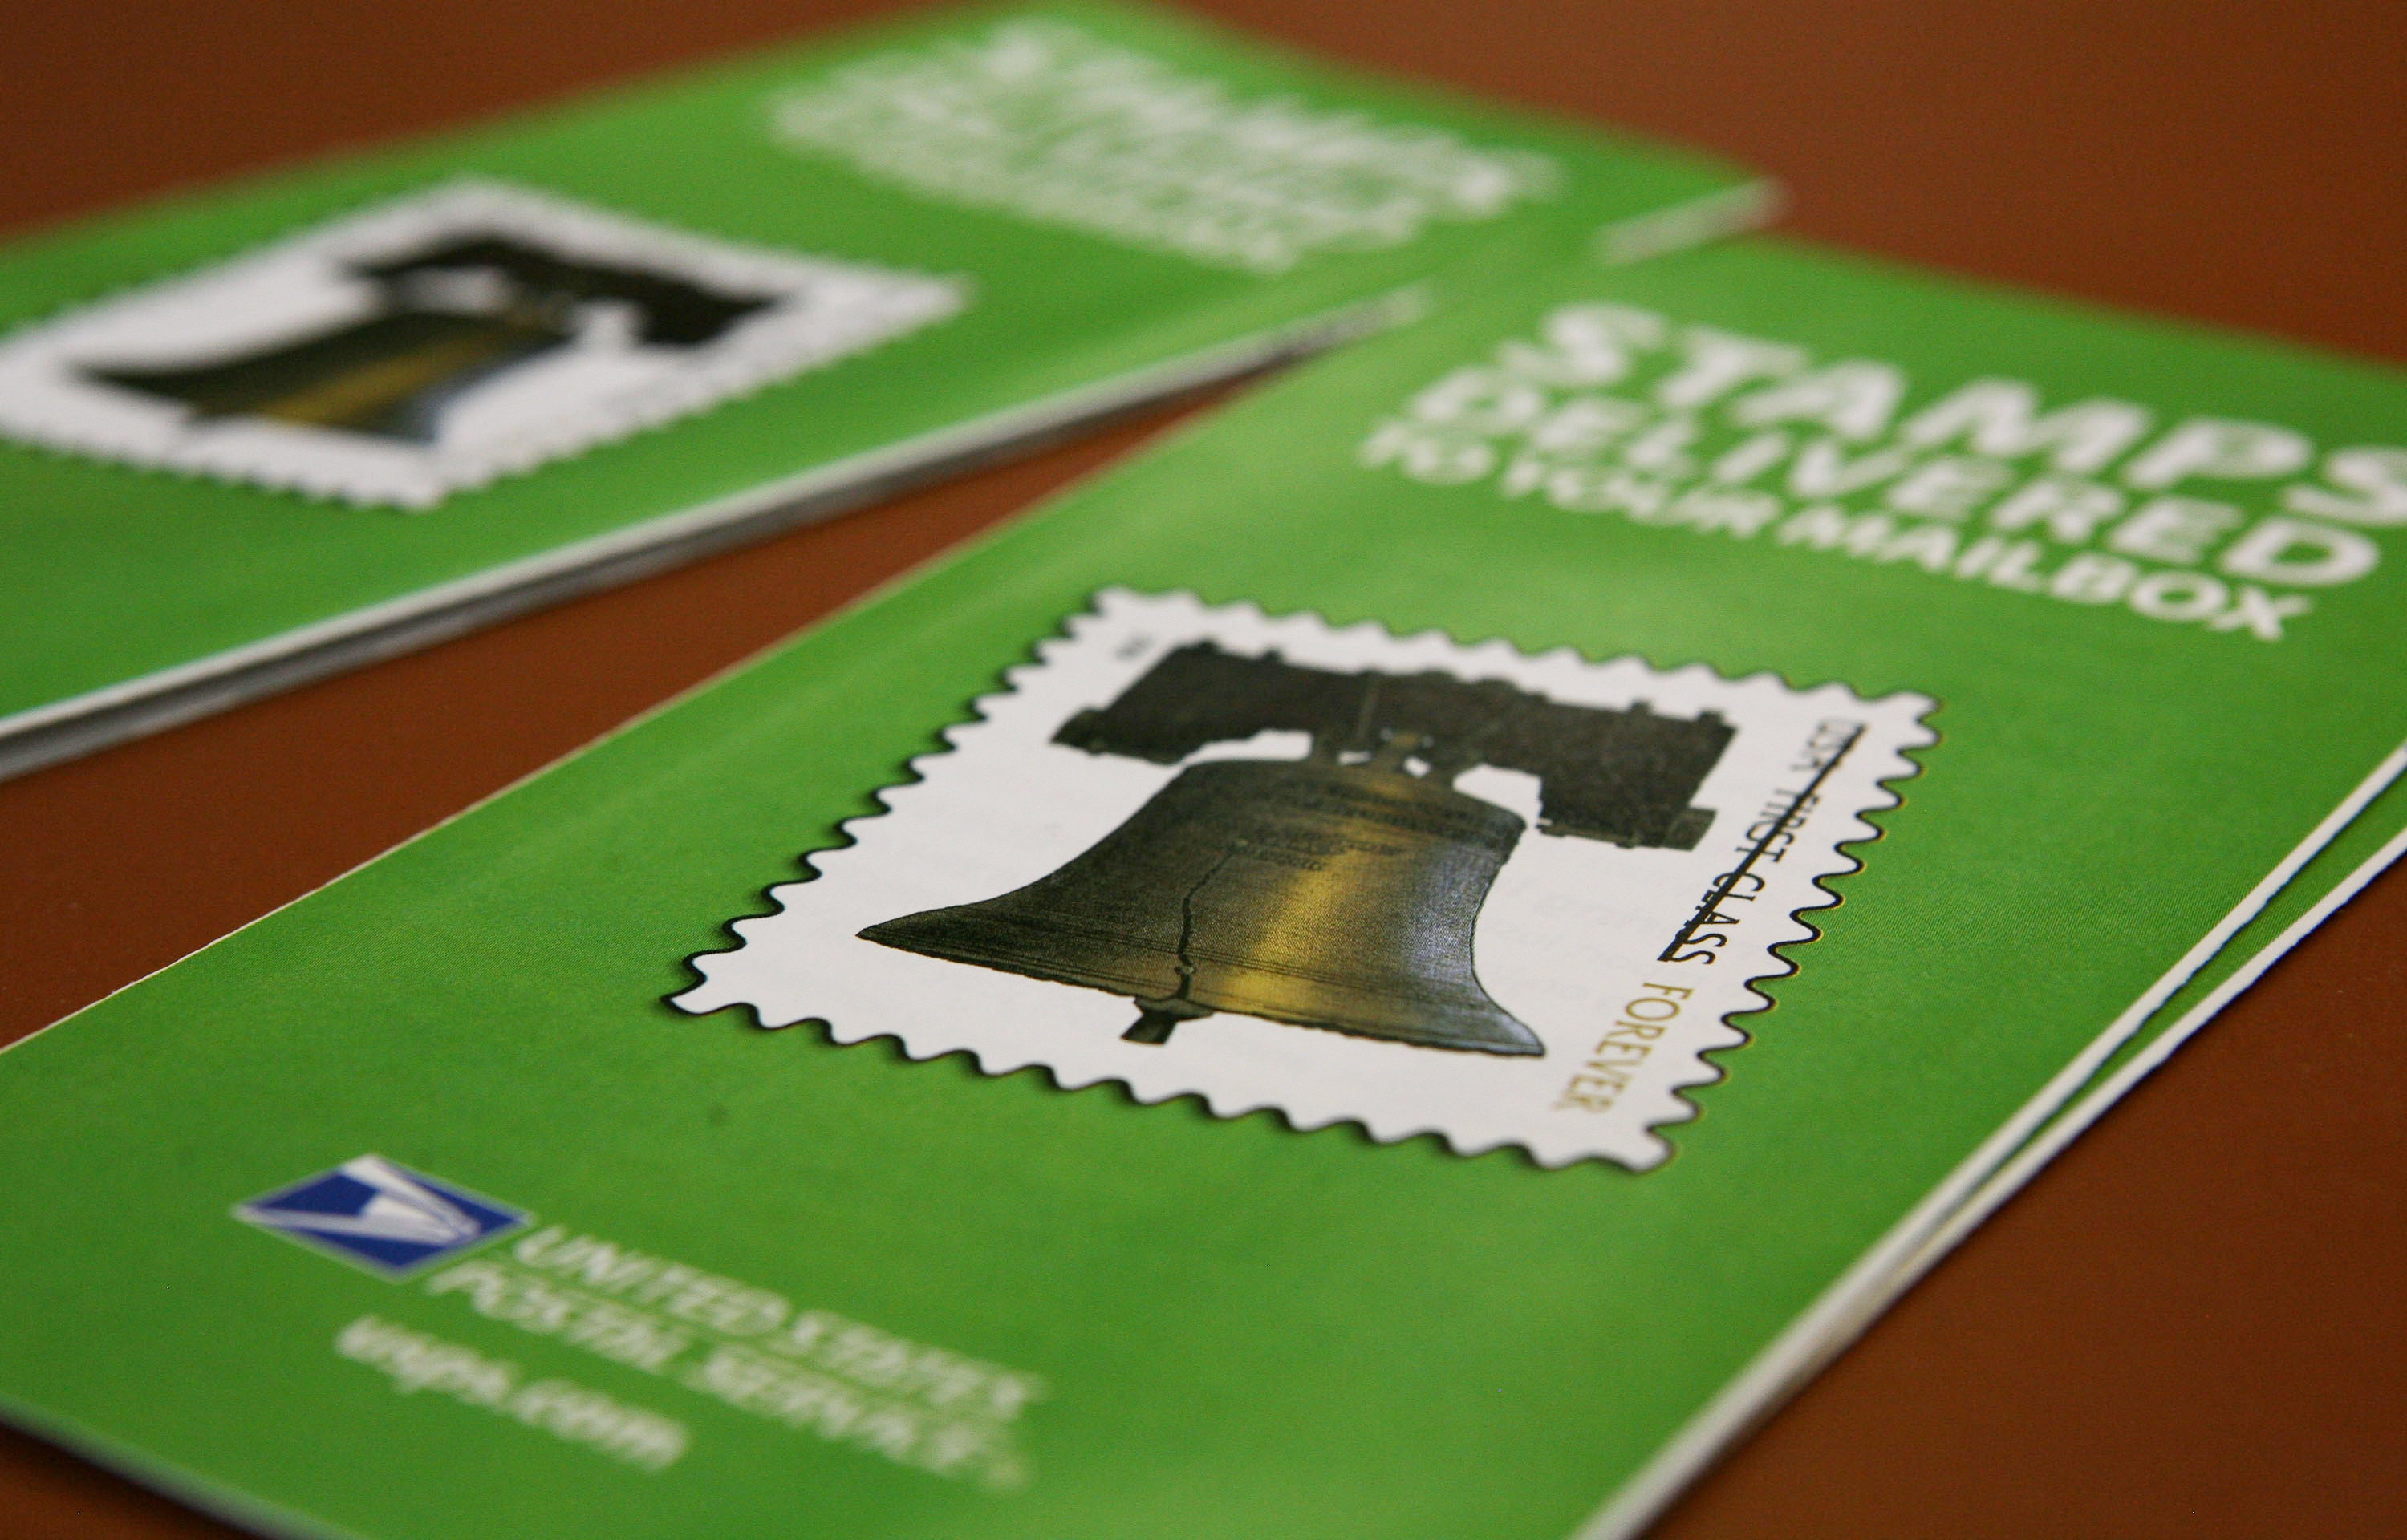 Cost Of USPS Stamps Rises 